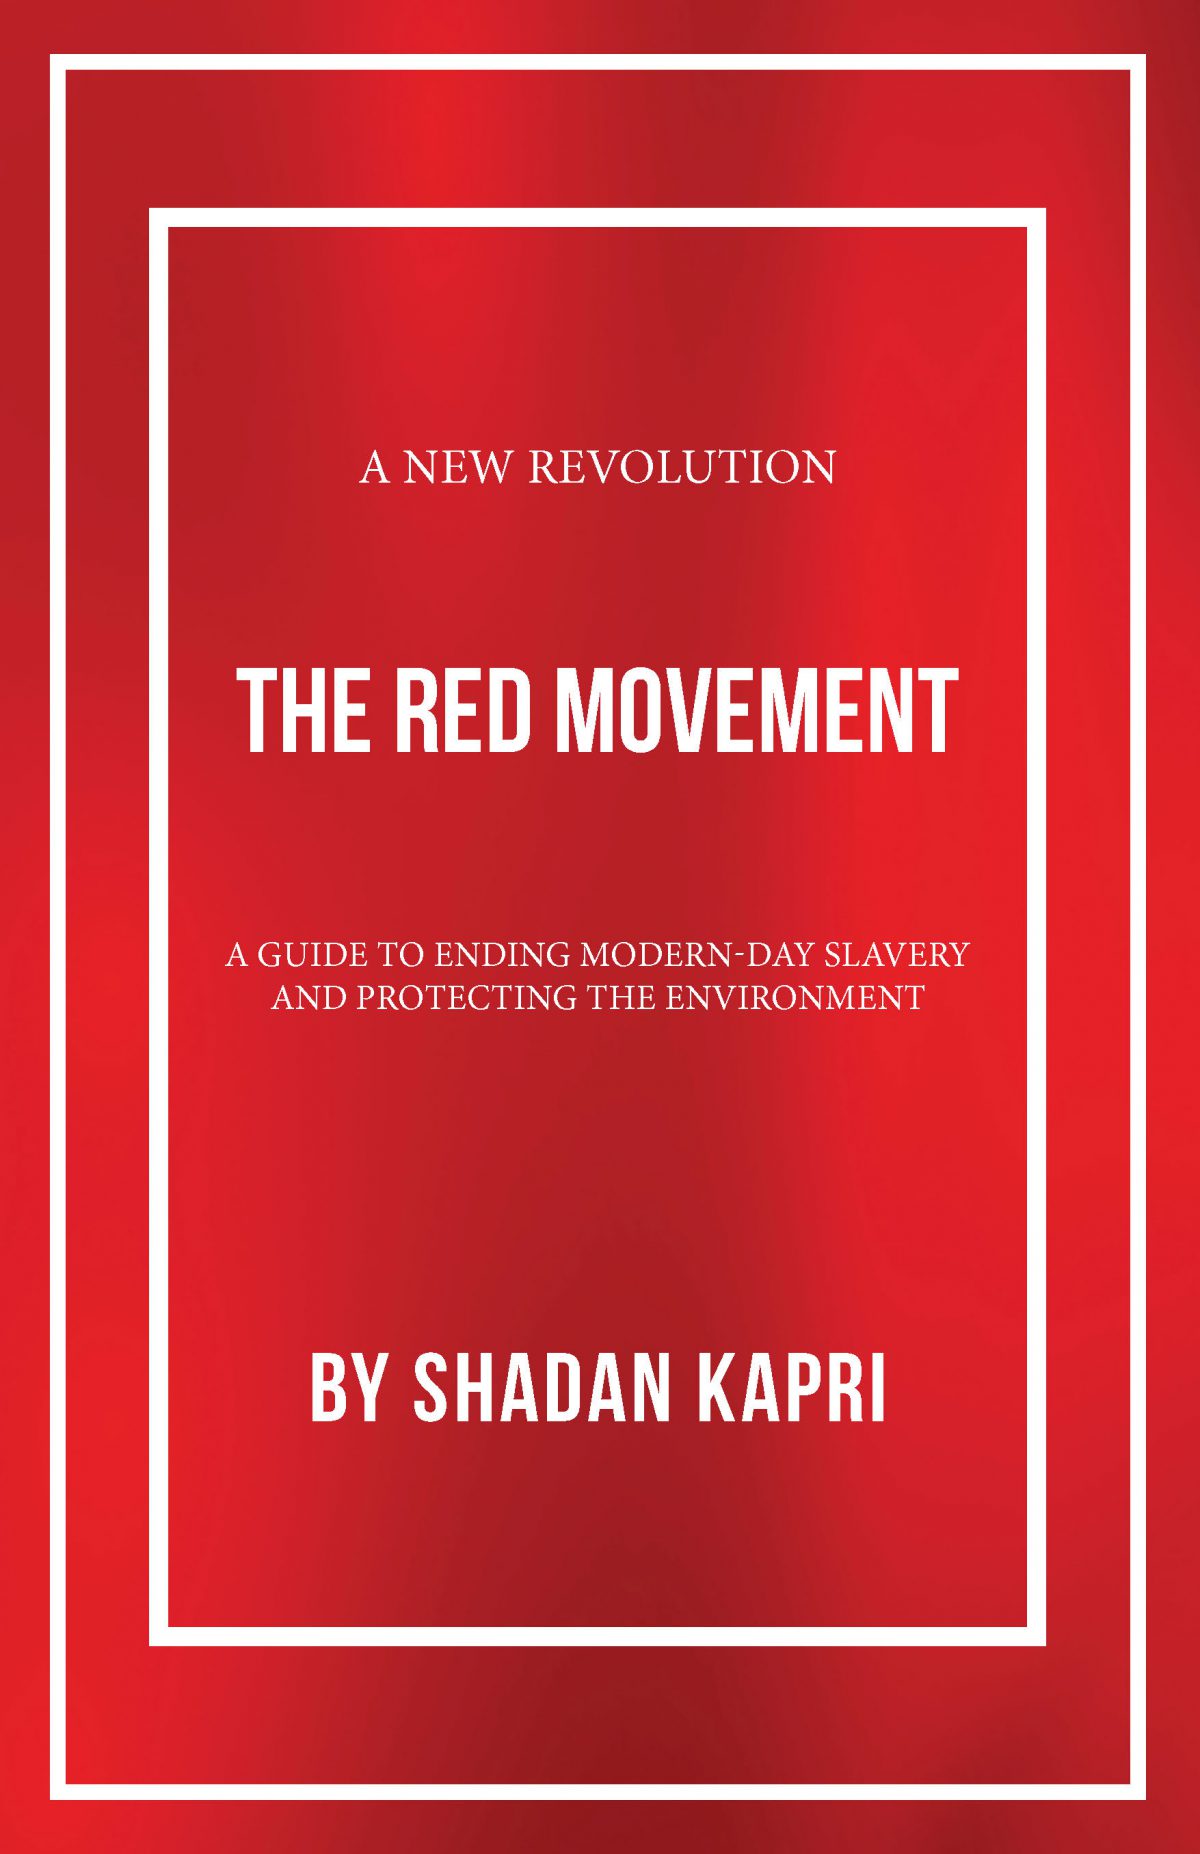 Cover of "The Red Movement" by Shadan Kapri.